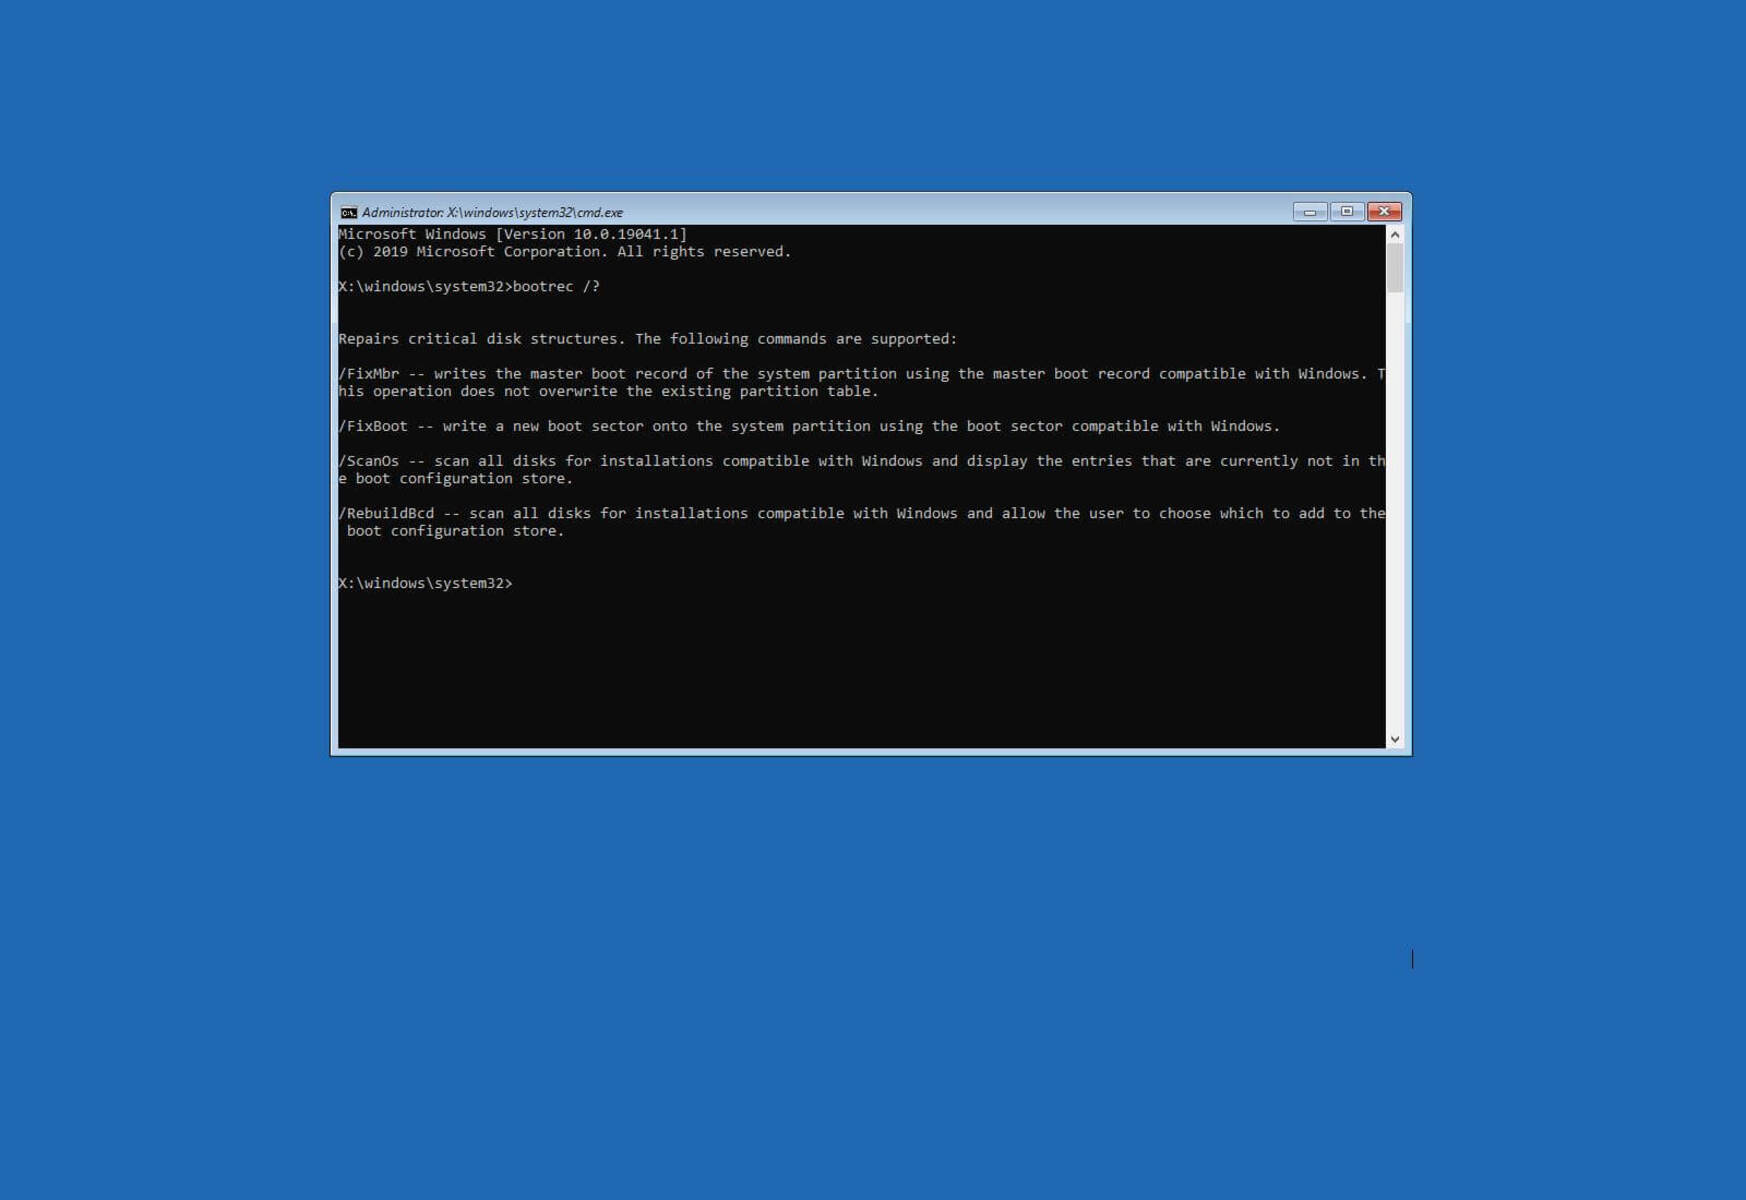 How To Write A New Partition Boot Sector In Windows